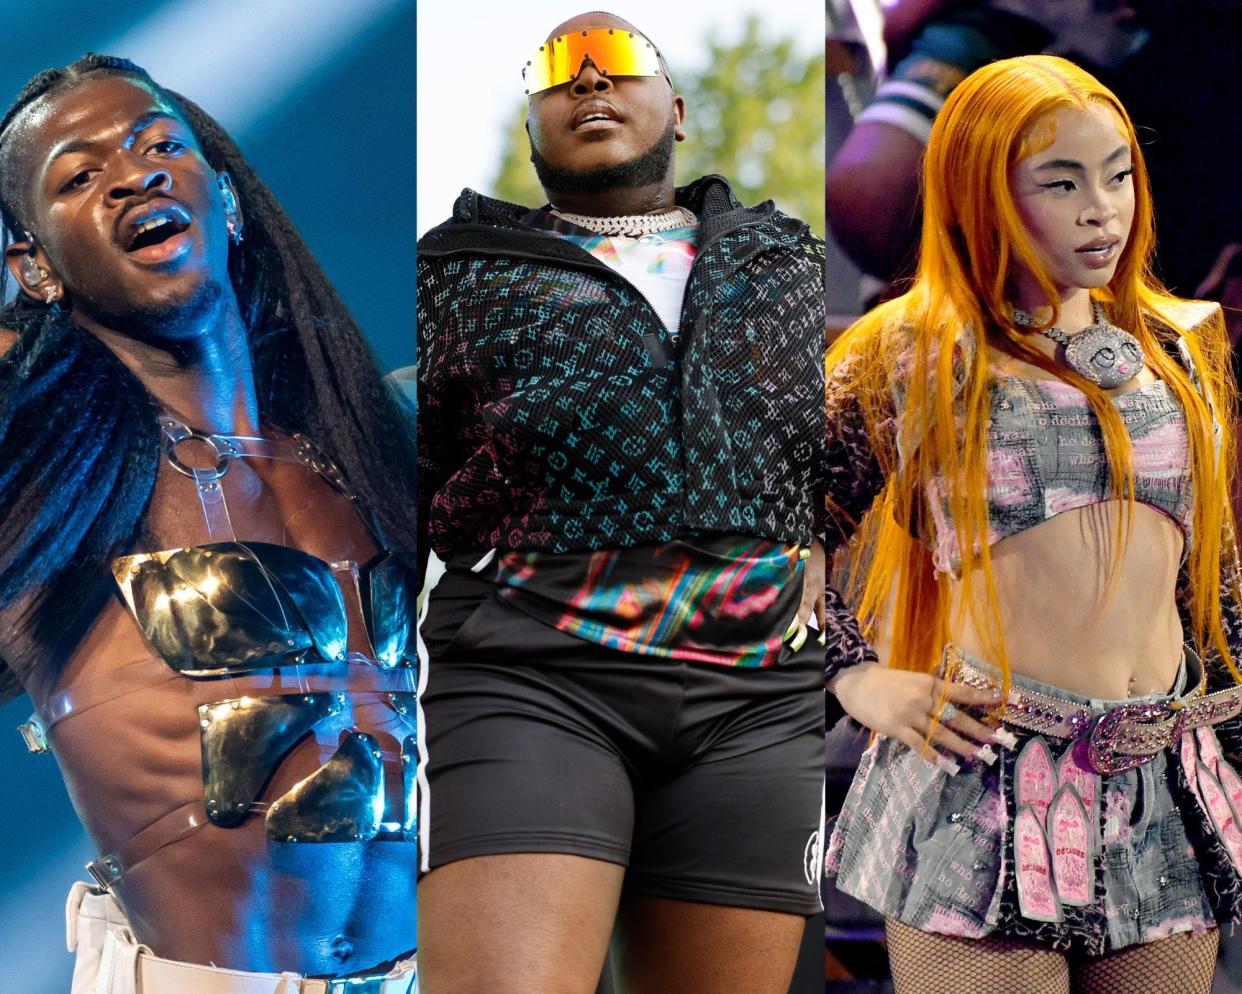 LGBTQ artists such as Lil Nas X, from left, Saucy Santana and Ice Spice are diversifying hip-hop with their queer self-expression.